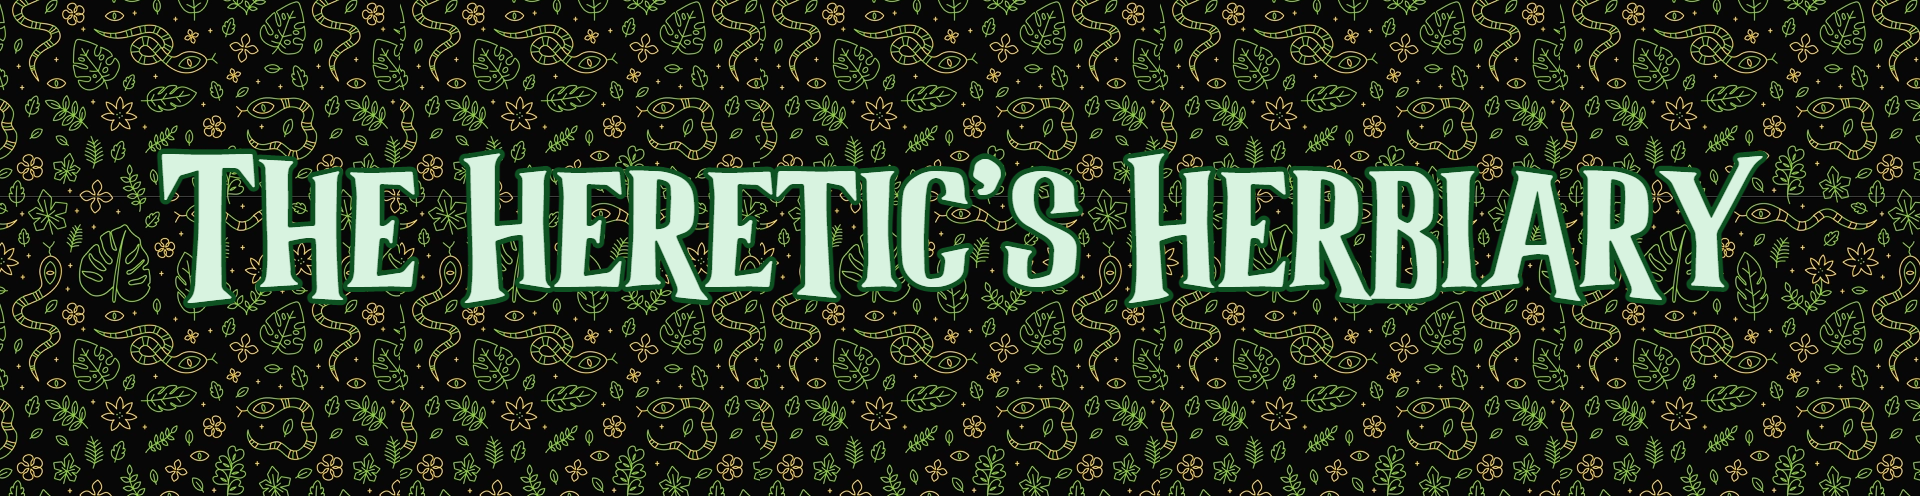 The Heretic's Herbiary vol #08